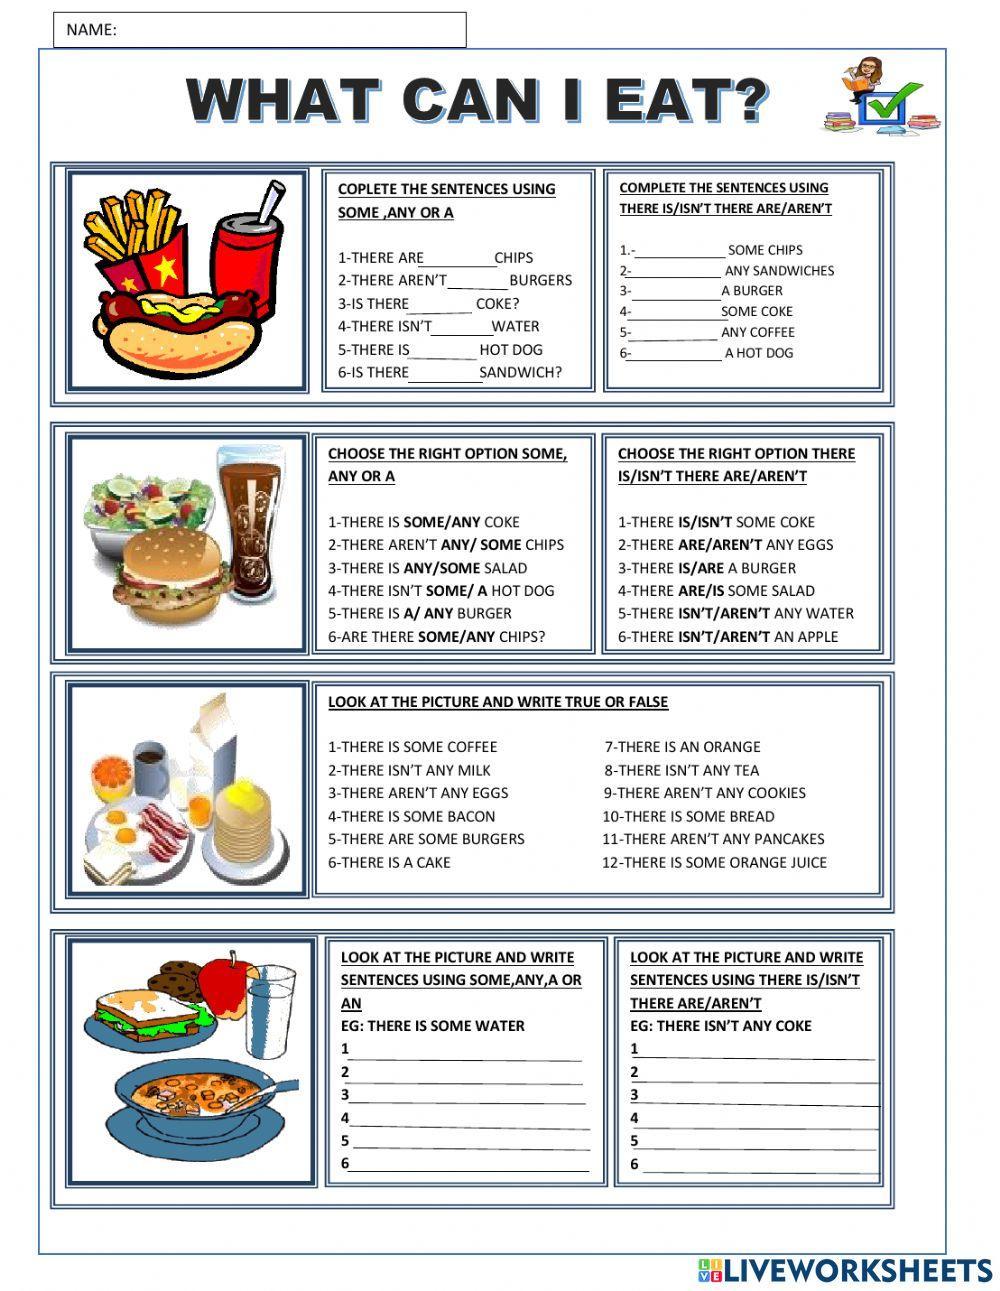 Worksheet: What can I eat